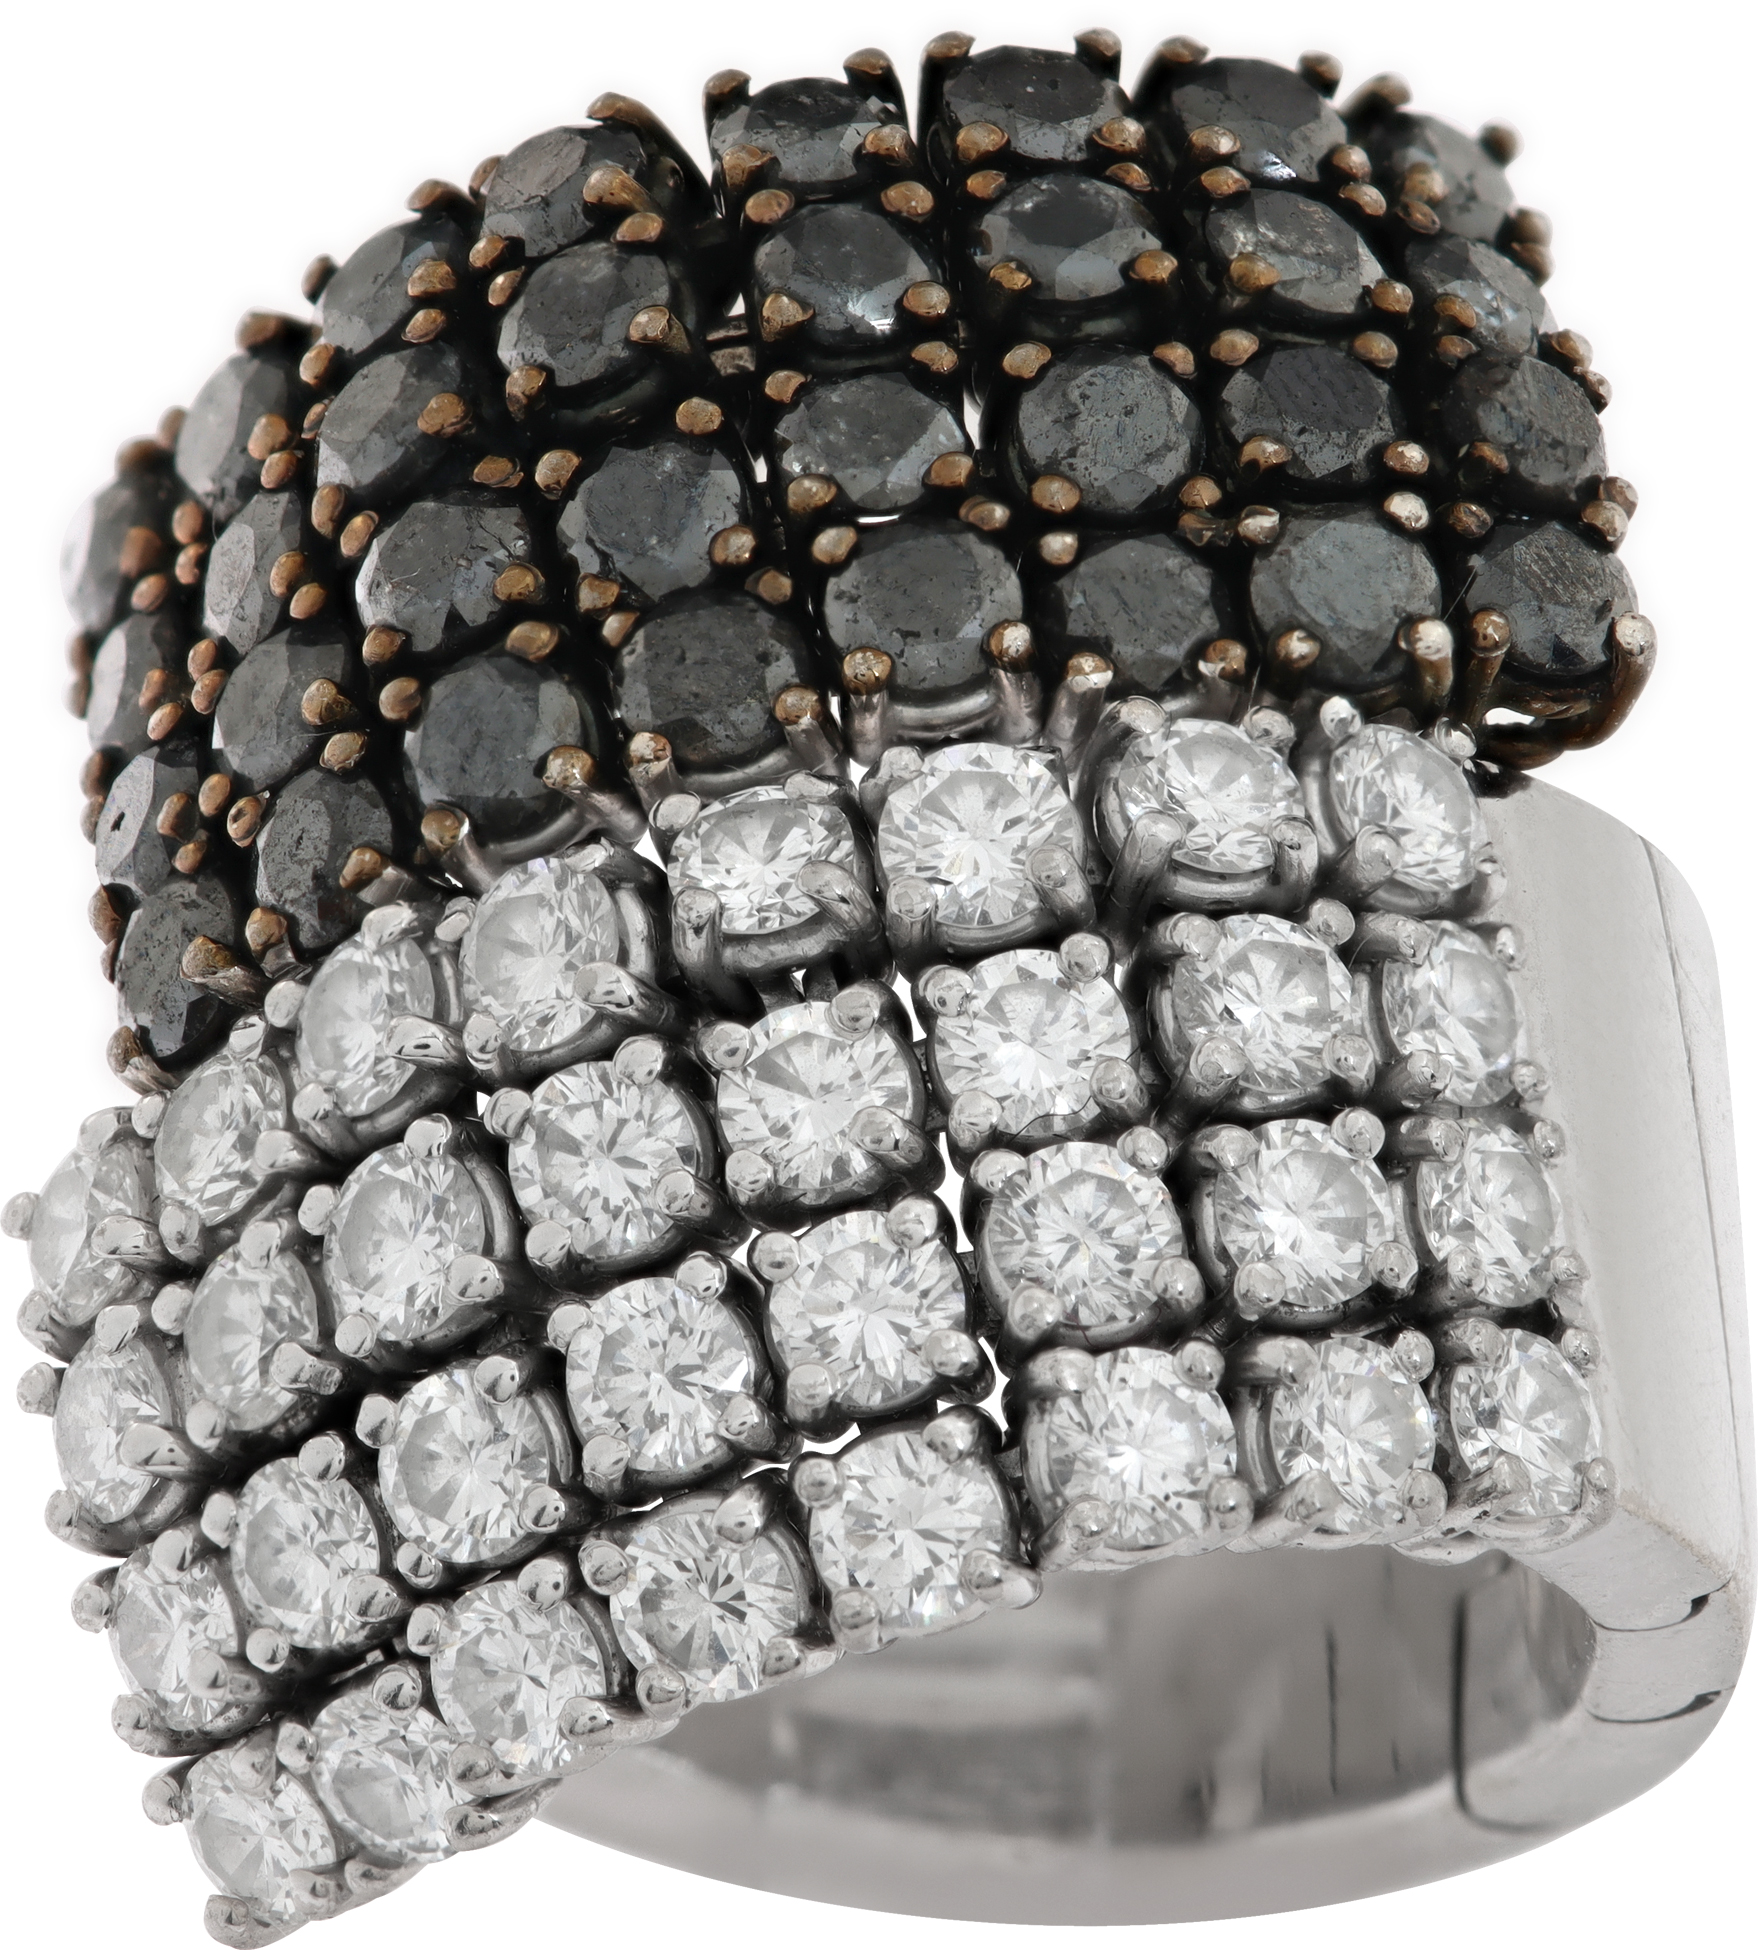 Black and white diamond ring in 18k white gold with 8 flexible rows of diamonds.